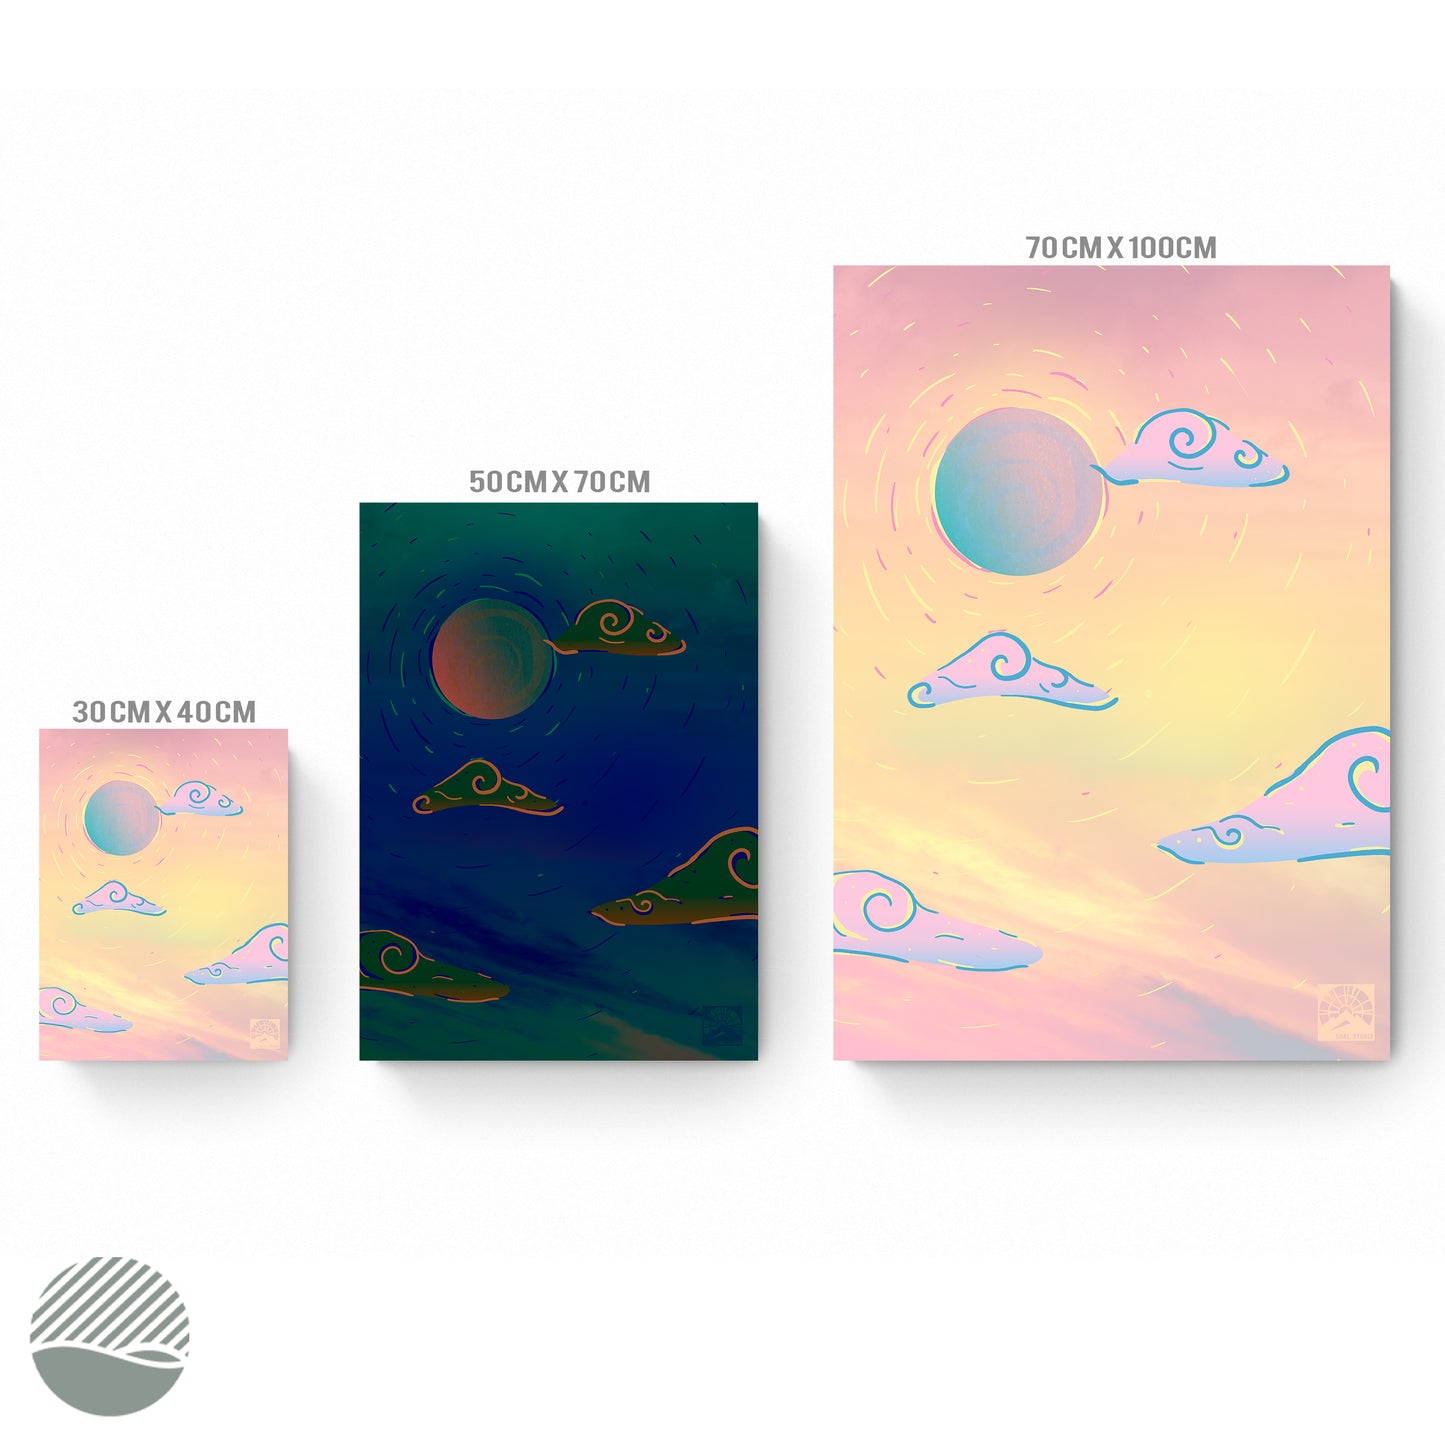 Print dimensions for Lifting Sky in Sunset and Cloudy Night art print by SOAL Studio on NOKUKO.com 